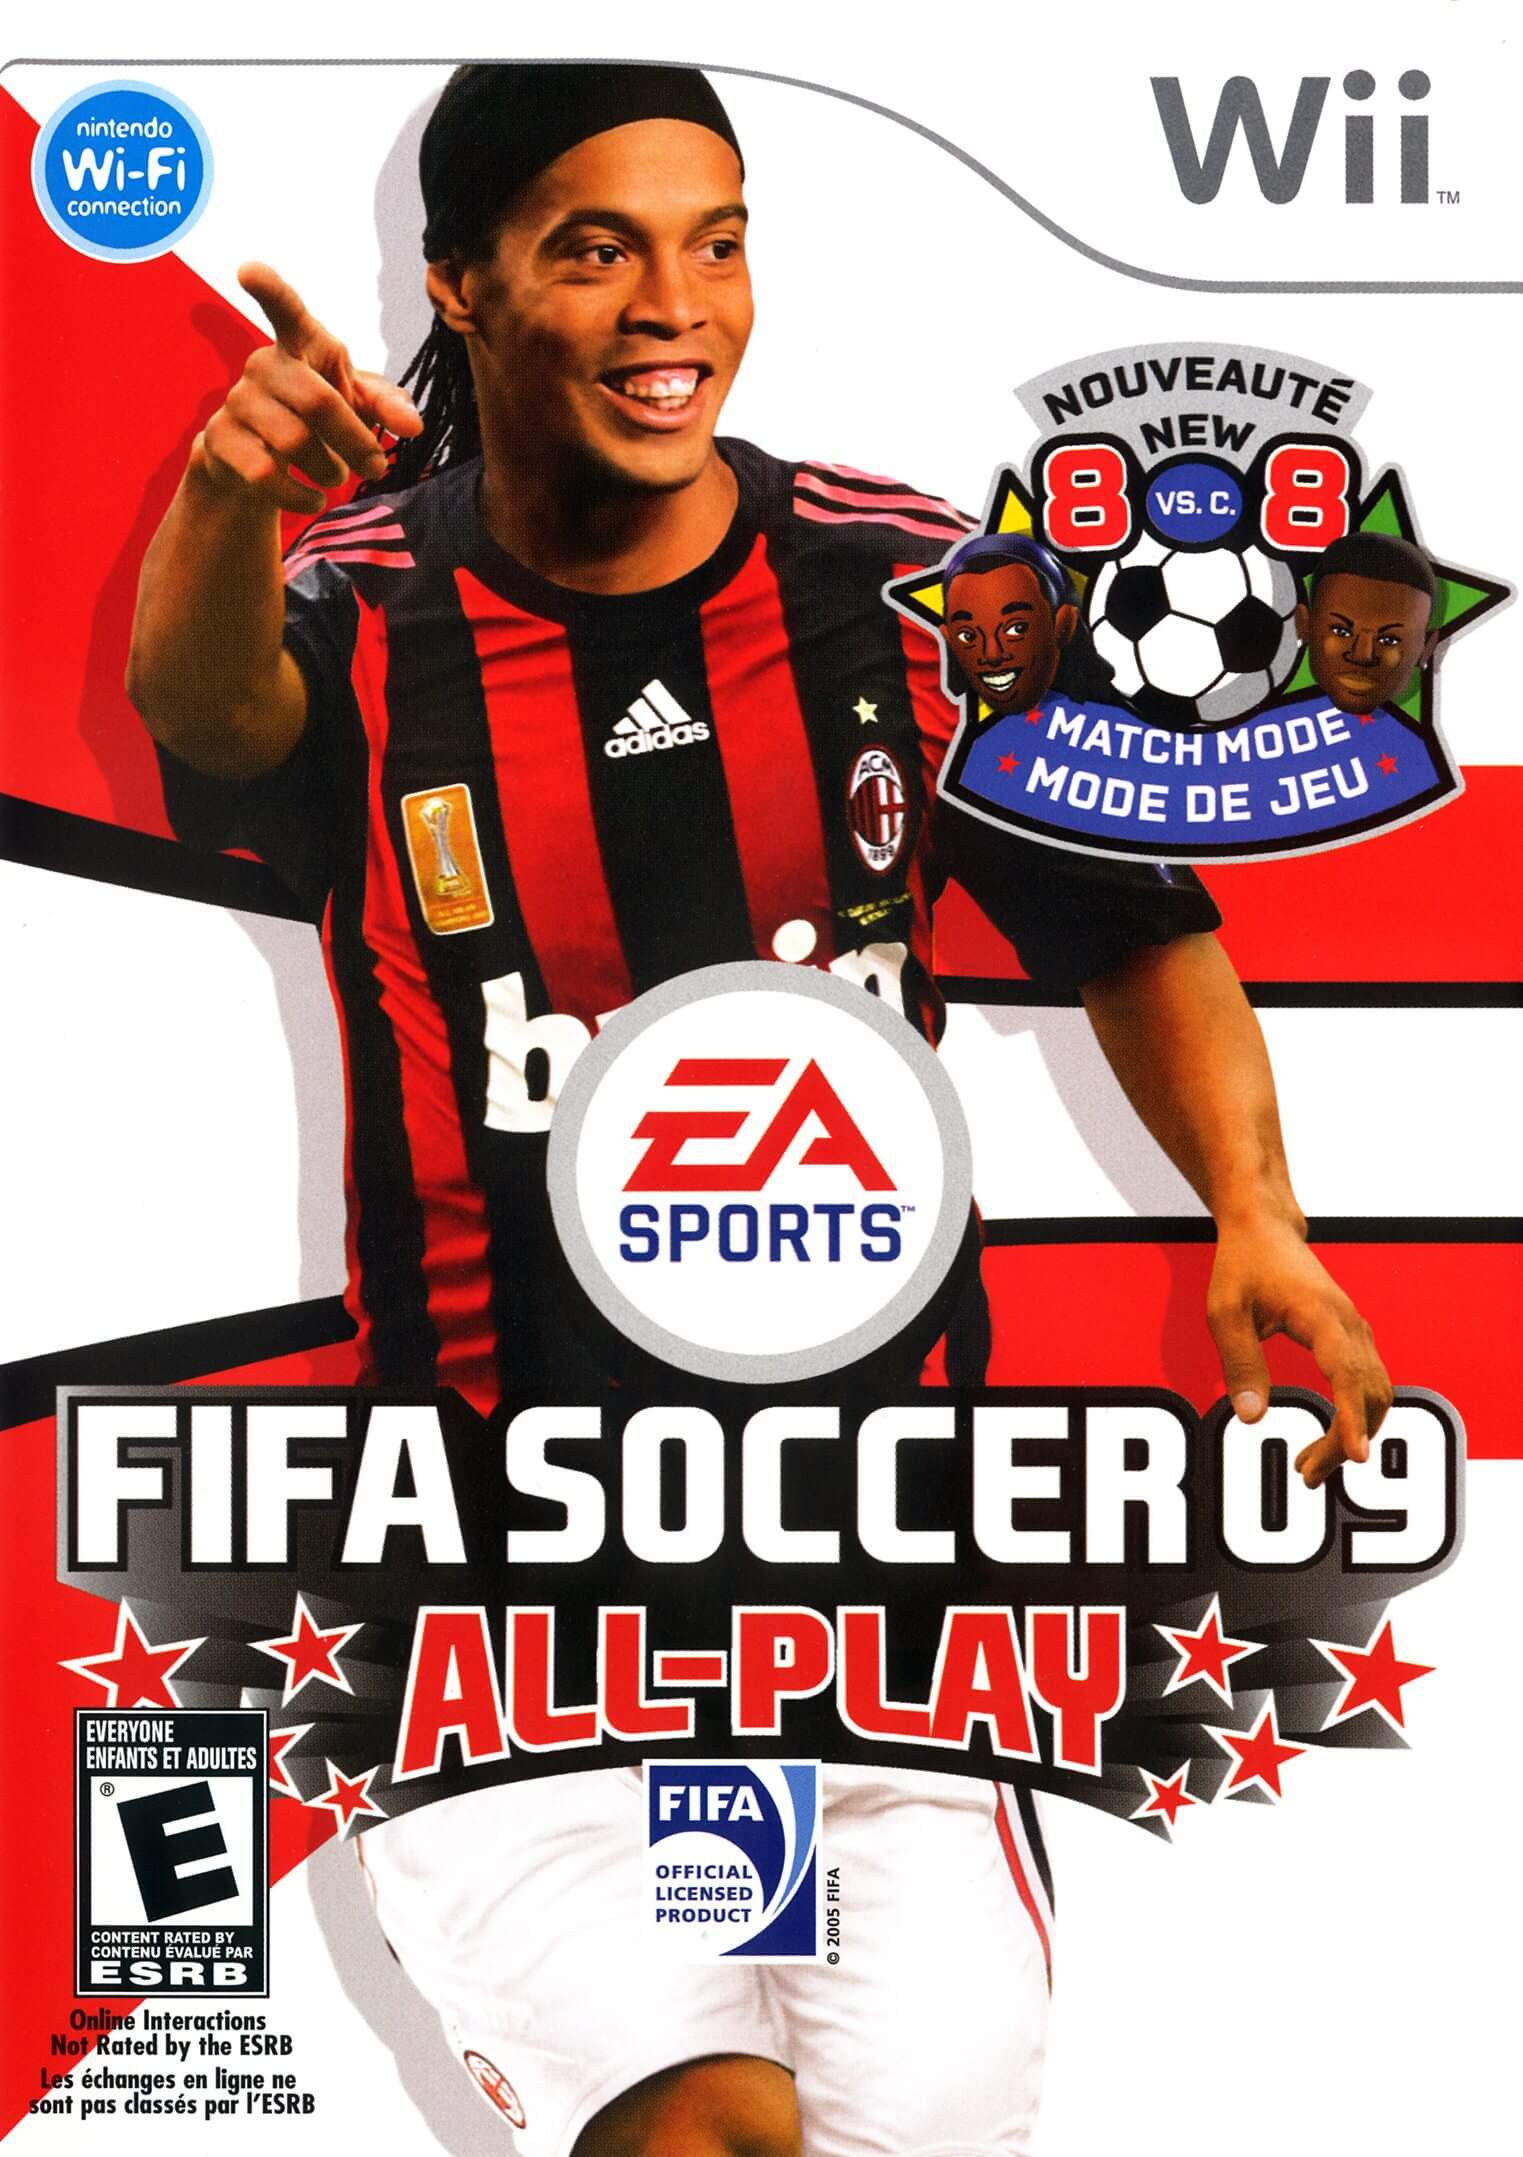 Fifa 09 V1.2 [english] No-dvd/fixed Exe free download : LoneBullet